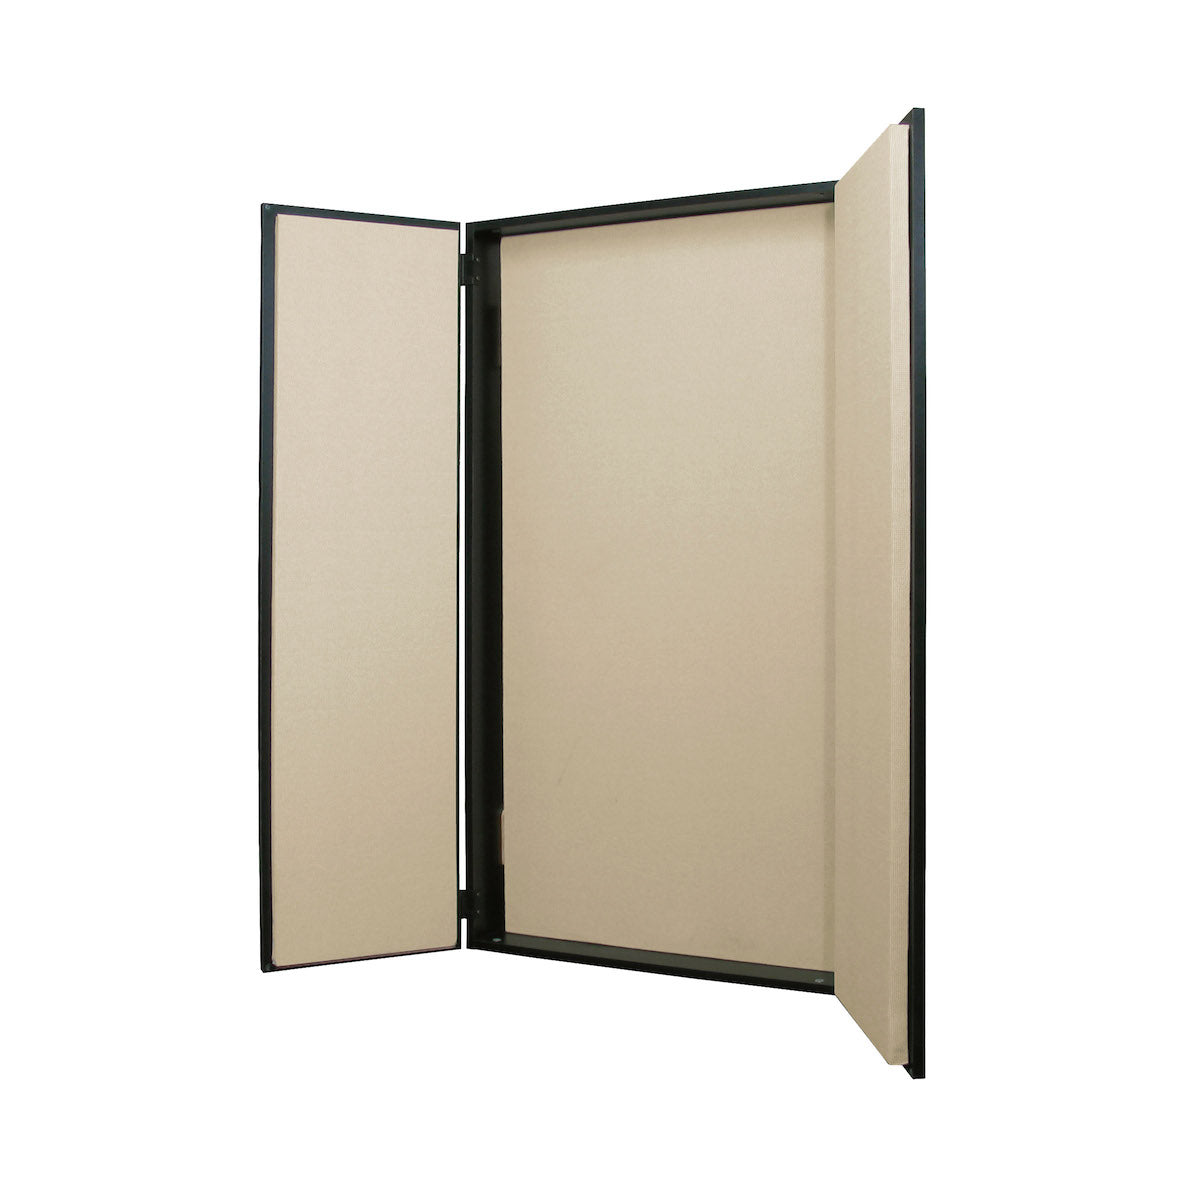 Primacoustic FlexiBooth - Wall Mount Vocal Booth, beige